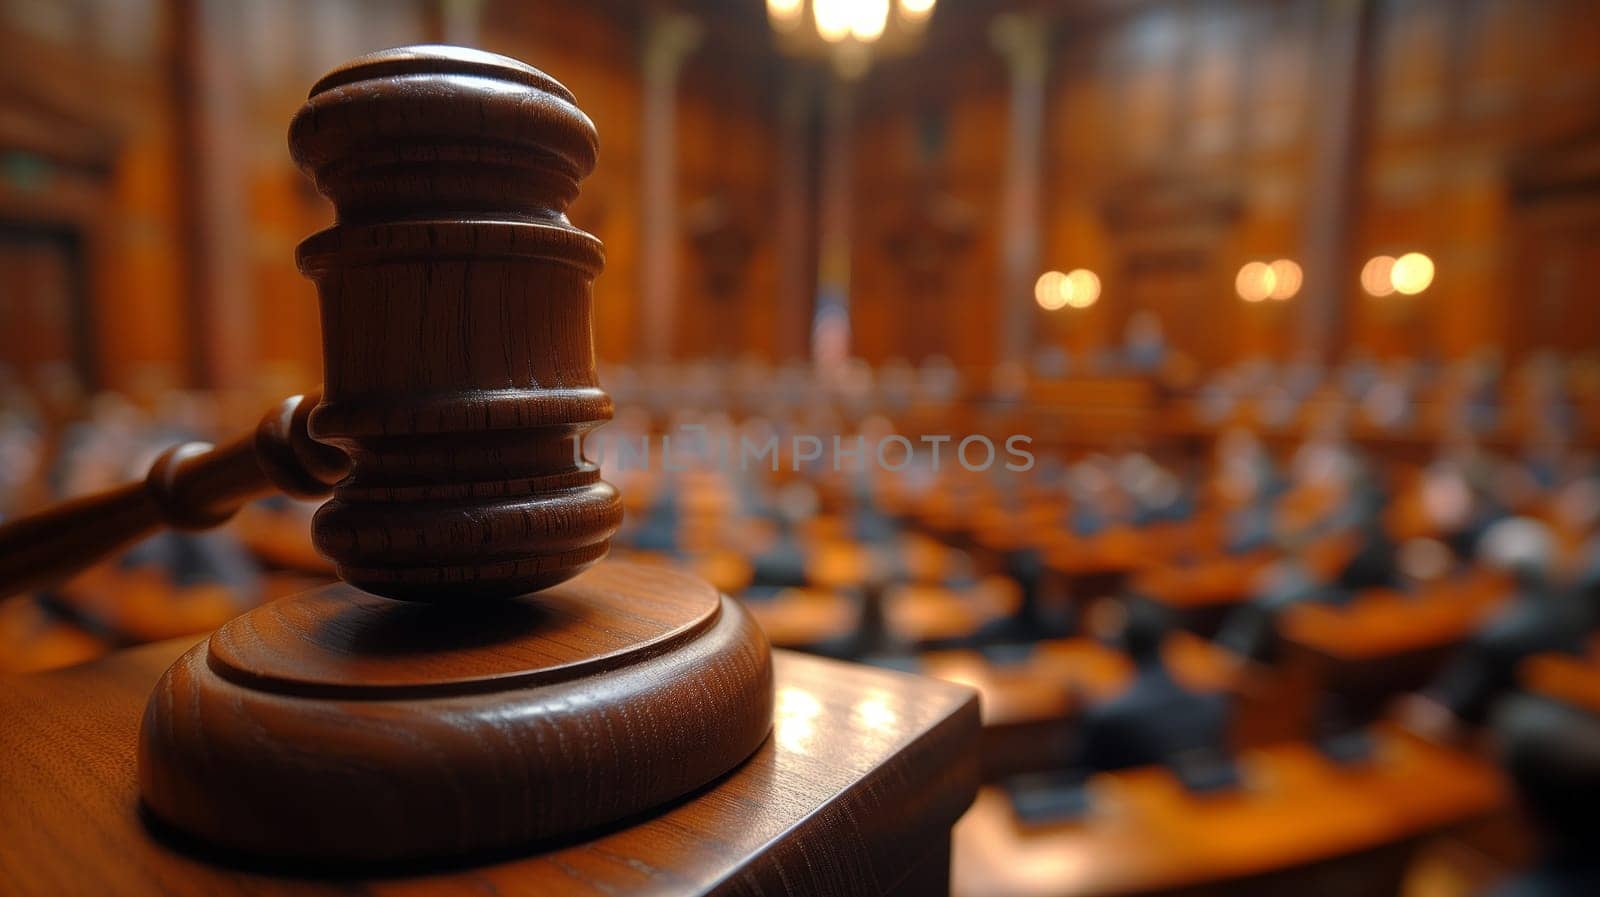 A wooden judges gavel sits on a table in a courtroom, creating a still life photography scene with wood and metal elements